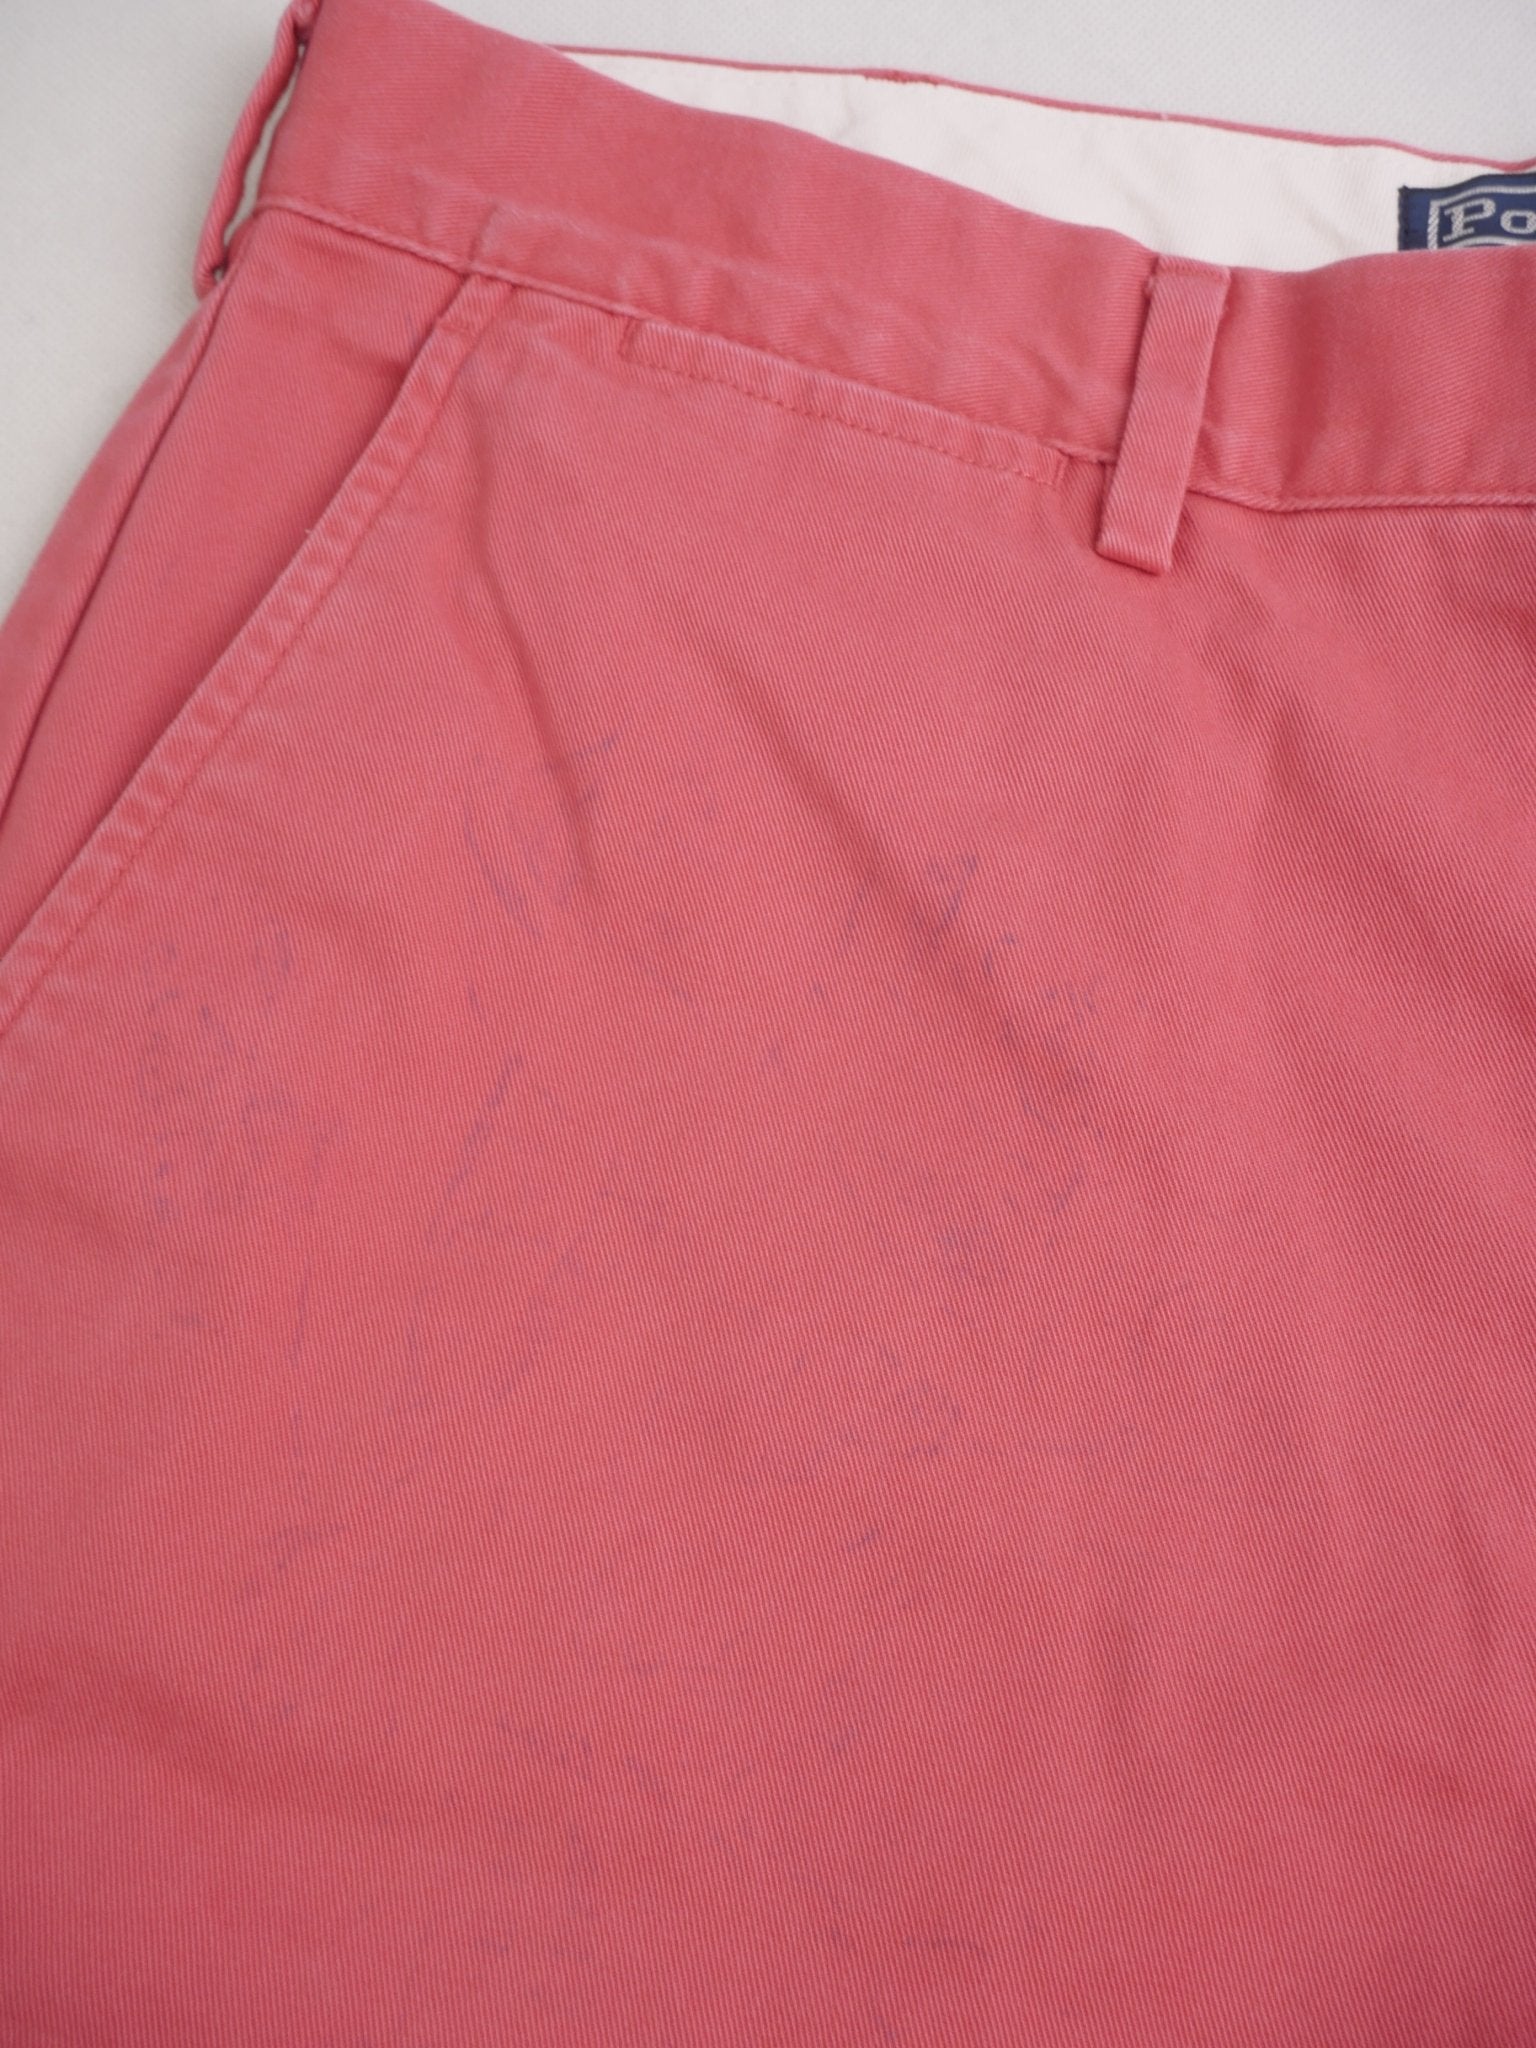 Polo Ralph Lauren embroidered Logo washed pink Short Hose - Peeces